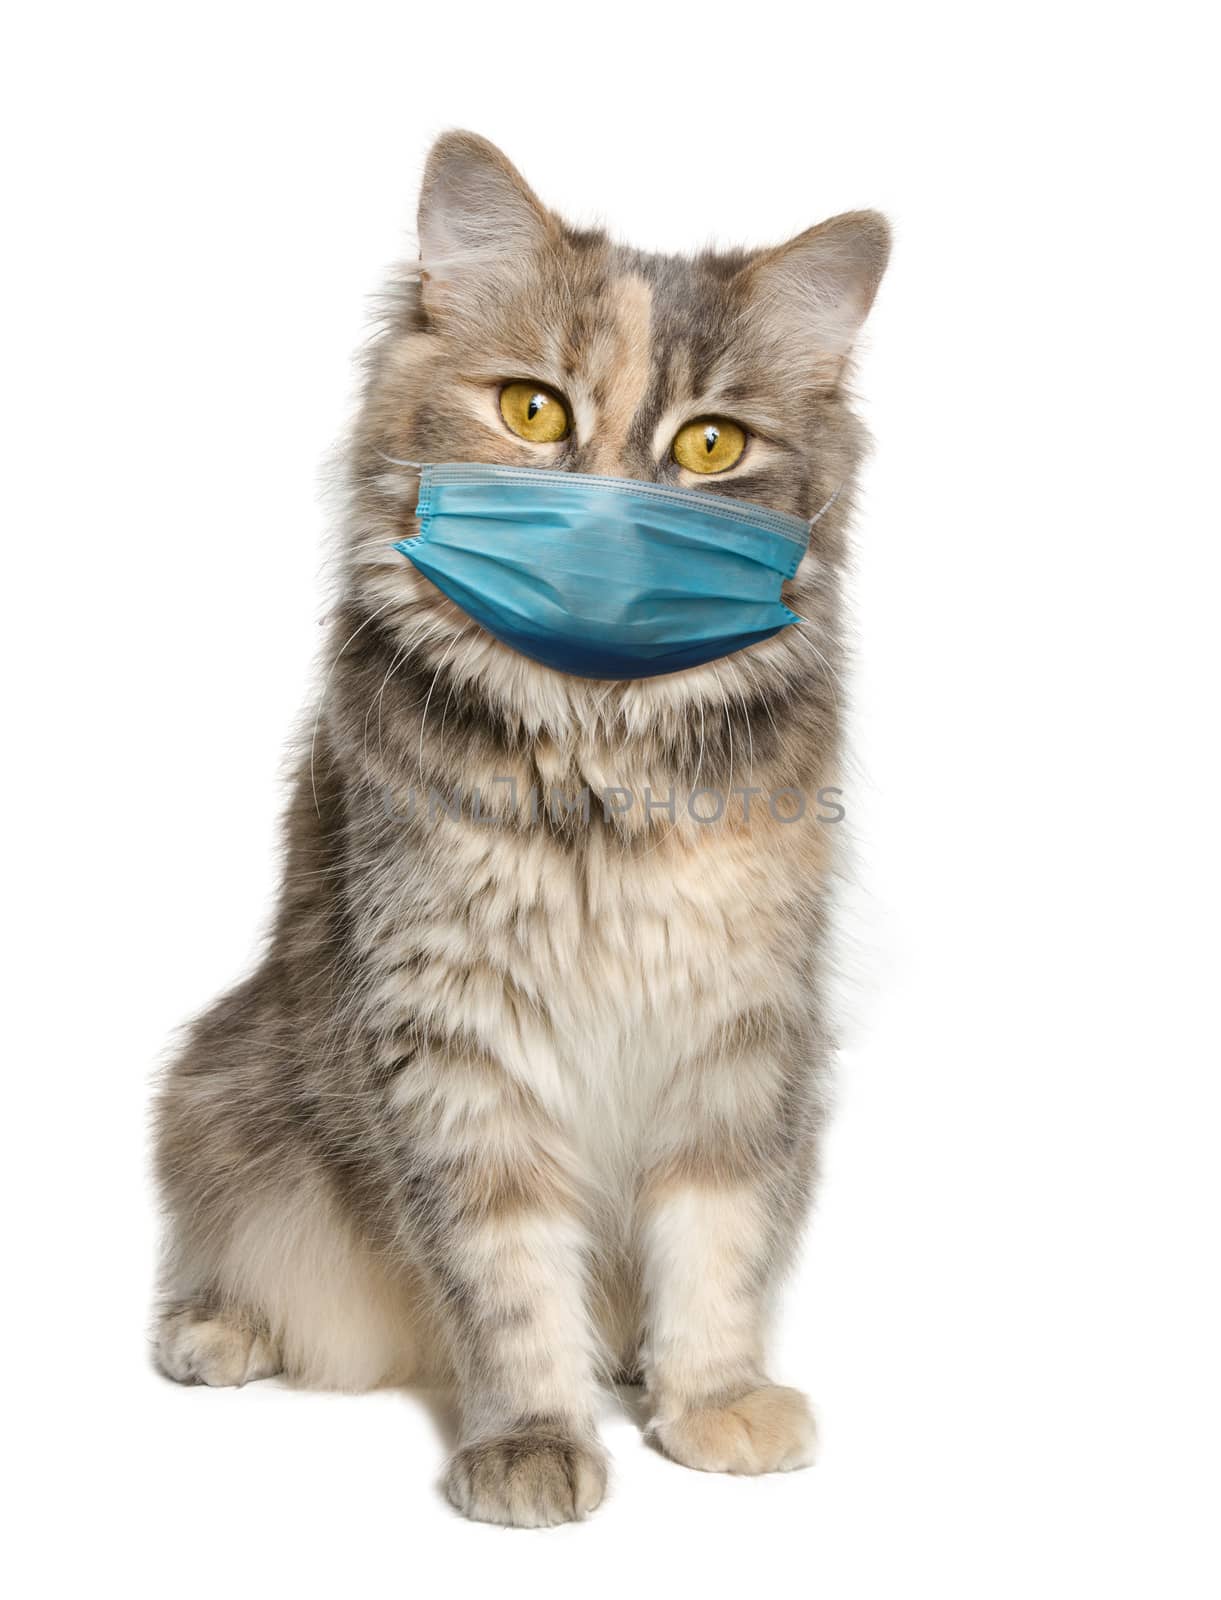 Adorable calico cat wearing a covid-19 face mask